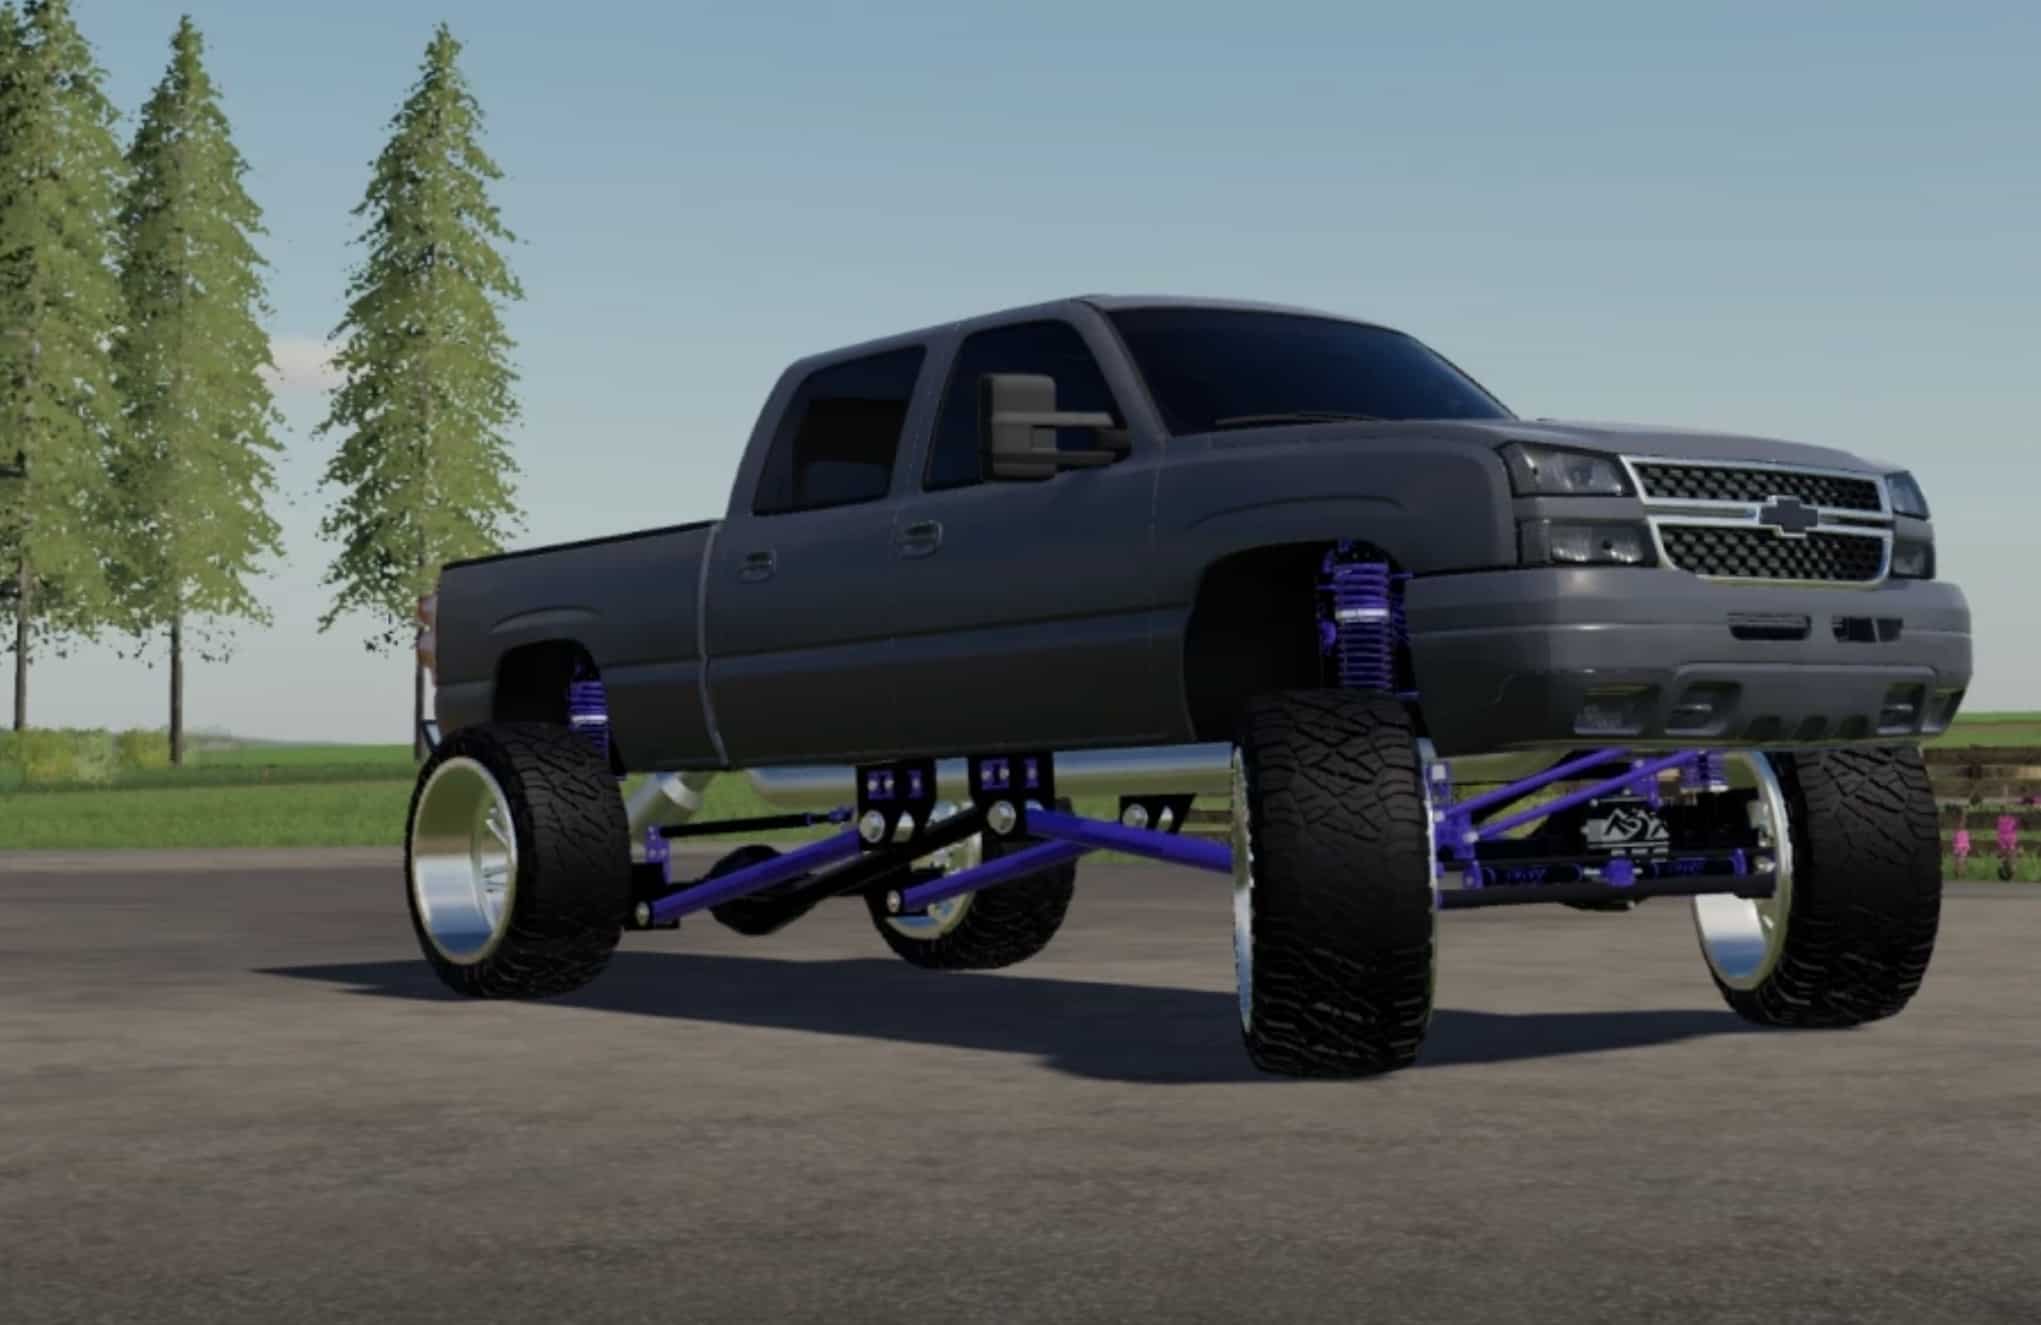 Fs19 Chevy Duramax Lifted Cateye V1000 Fs 19 Cars Mod Download